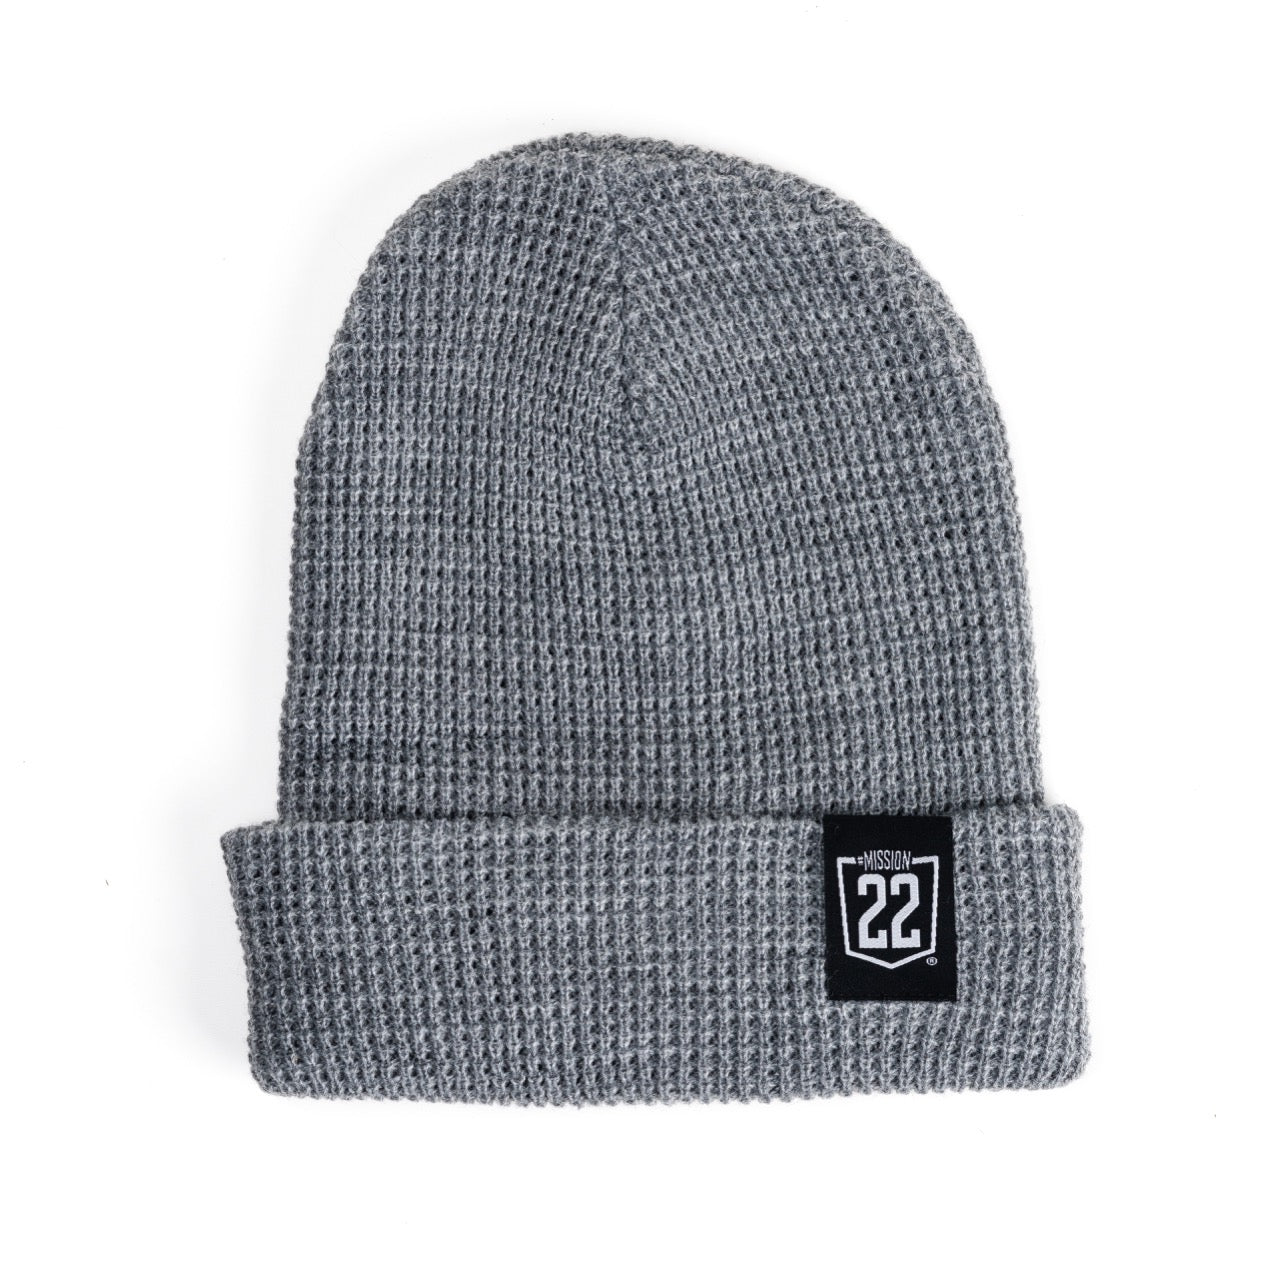 Product Image of Knit Cap #5